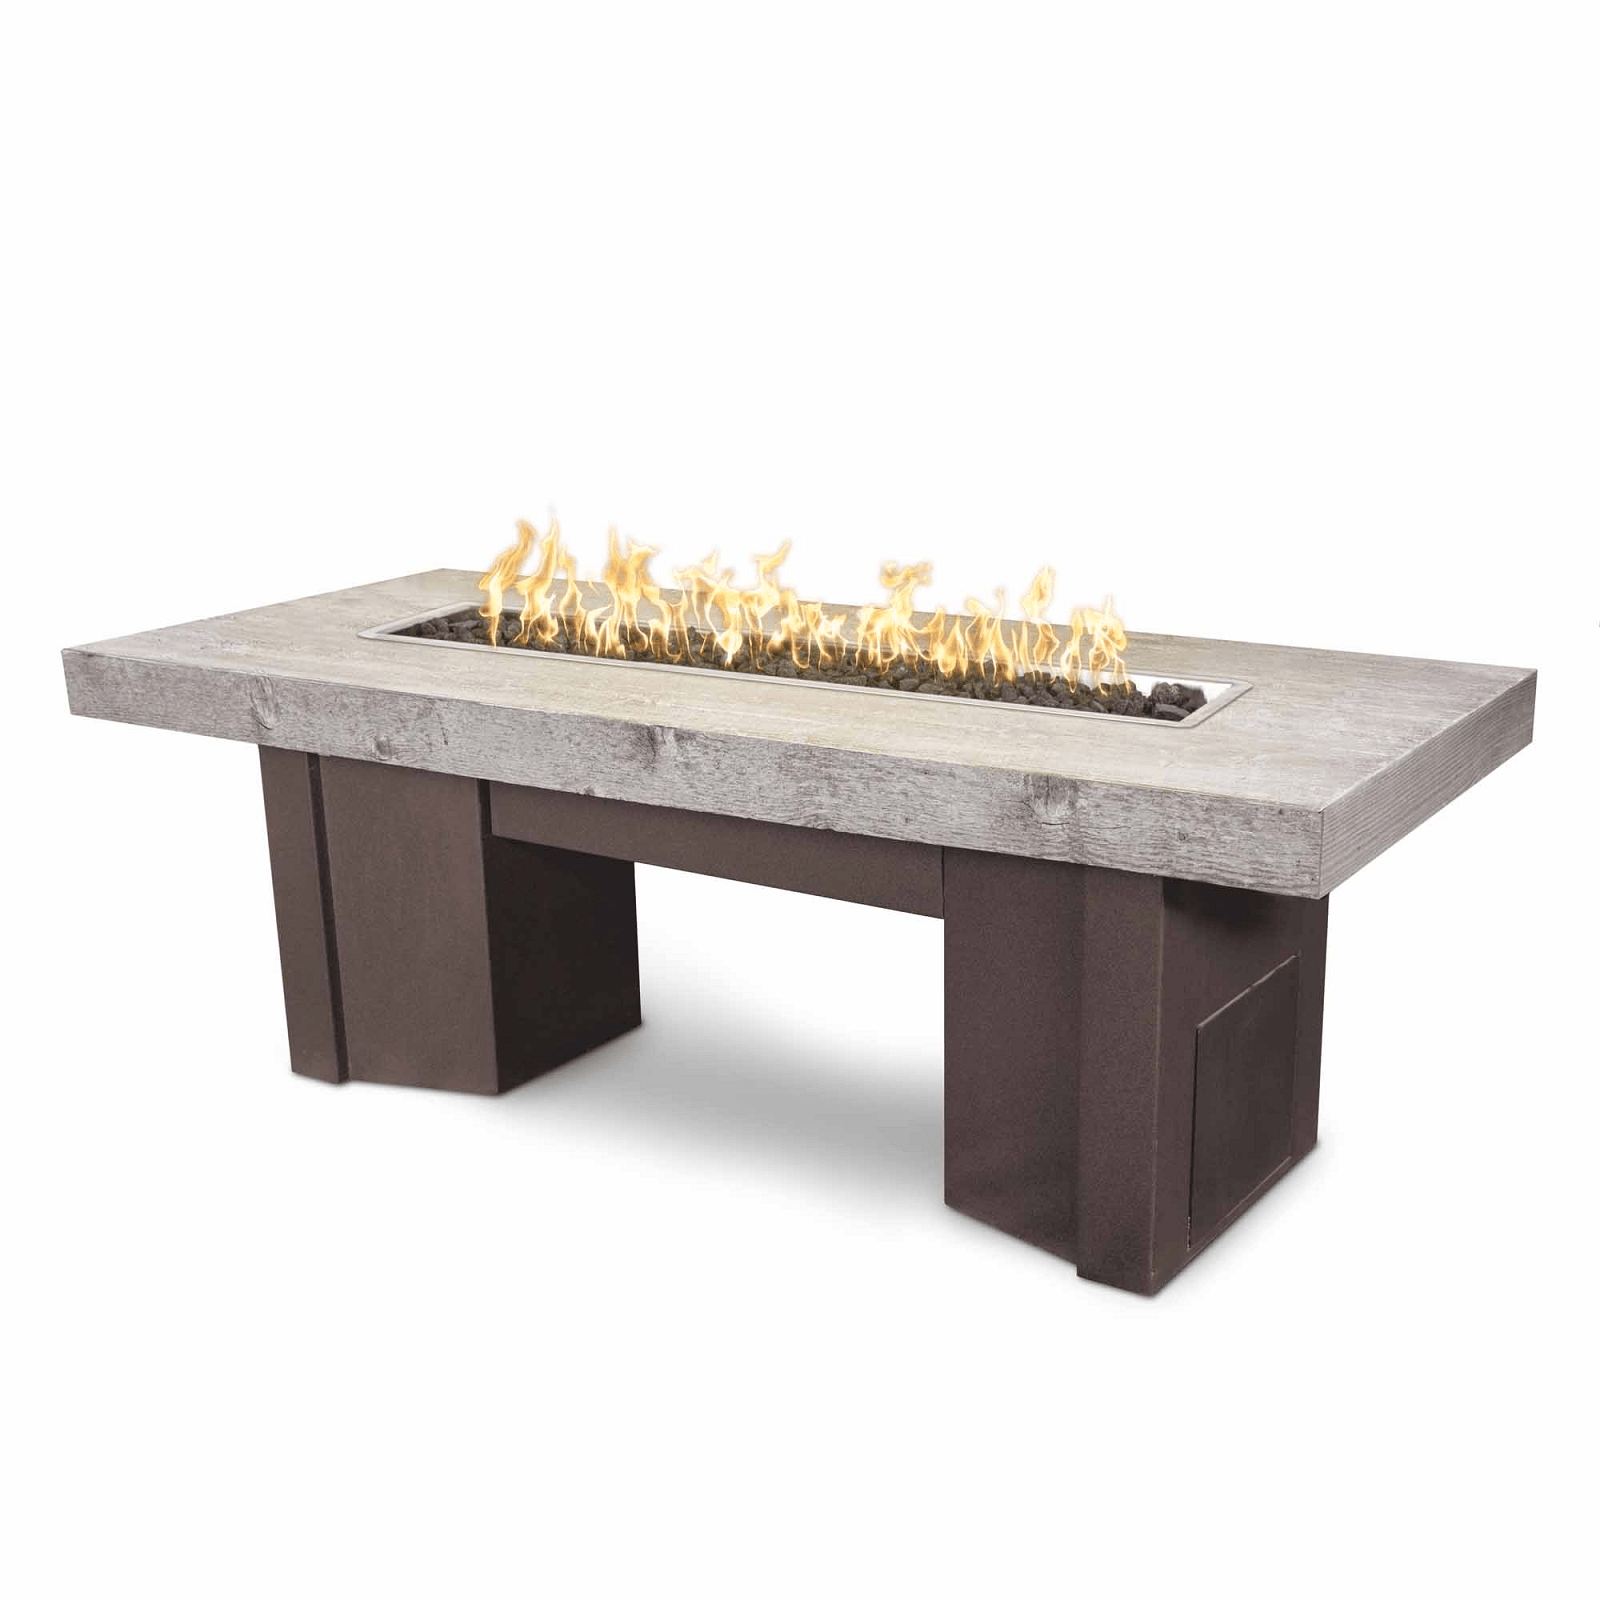 The Outdoor Plus Fire Features The Outdoor Plus 60" Alameda Fire Table Wood Grain - 12V Electronic Ignition / OPT-ALMWG60E12V